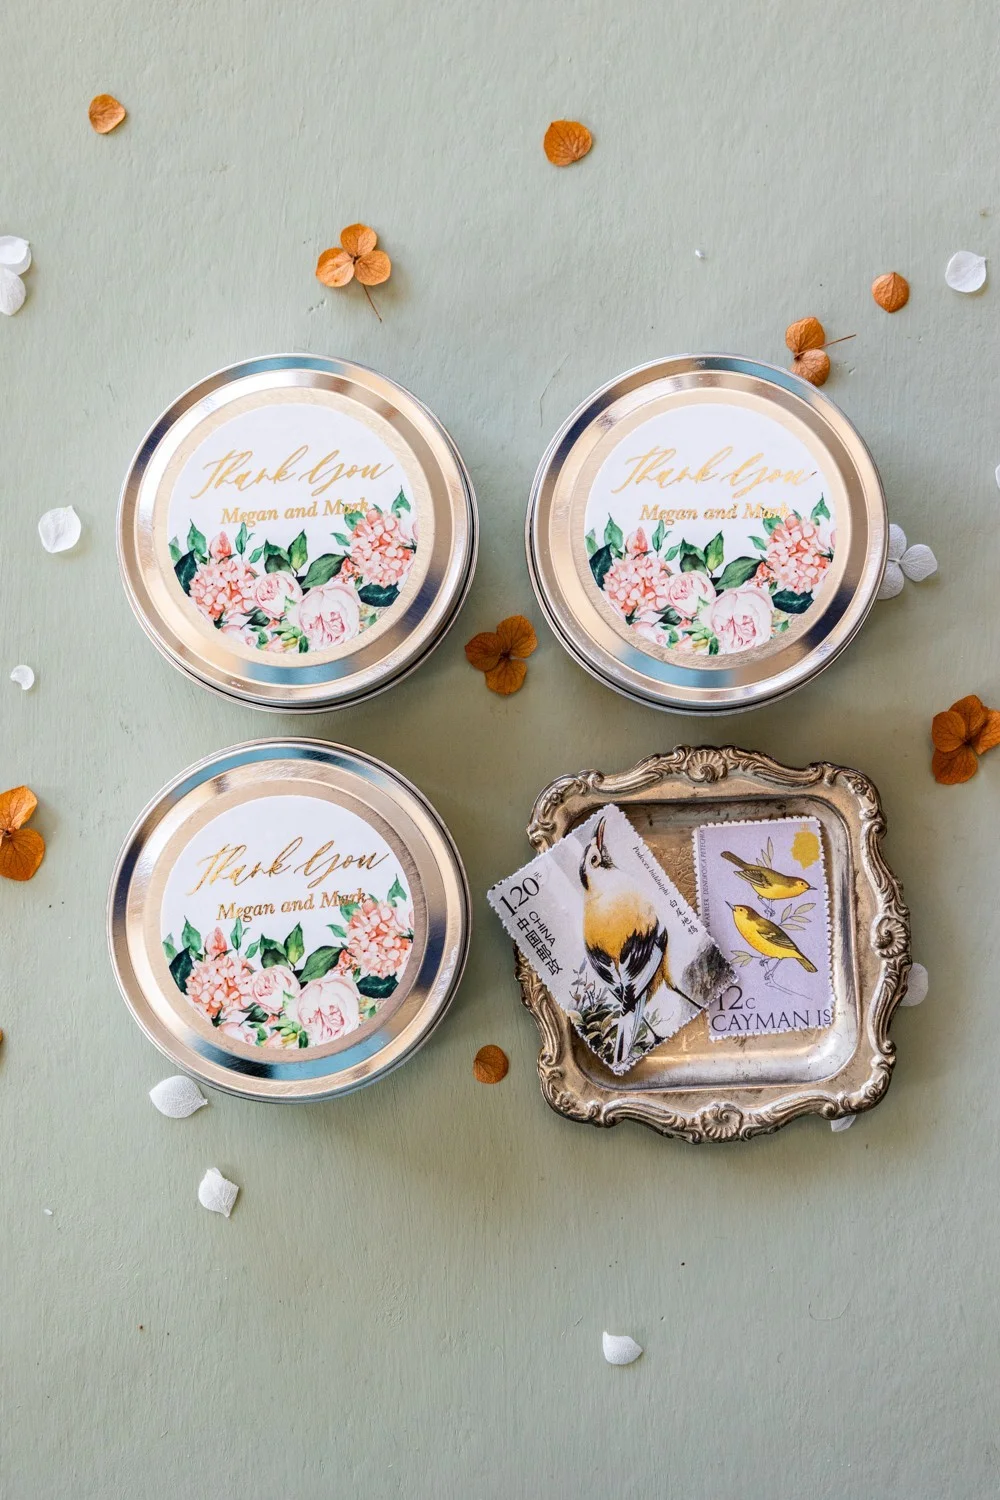 Personalized, handmade Soy Wax Candles Favors for your Wedding Guests with gold text and blush pink flowers